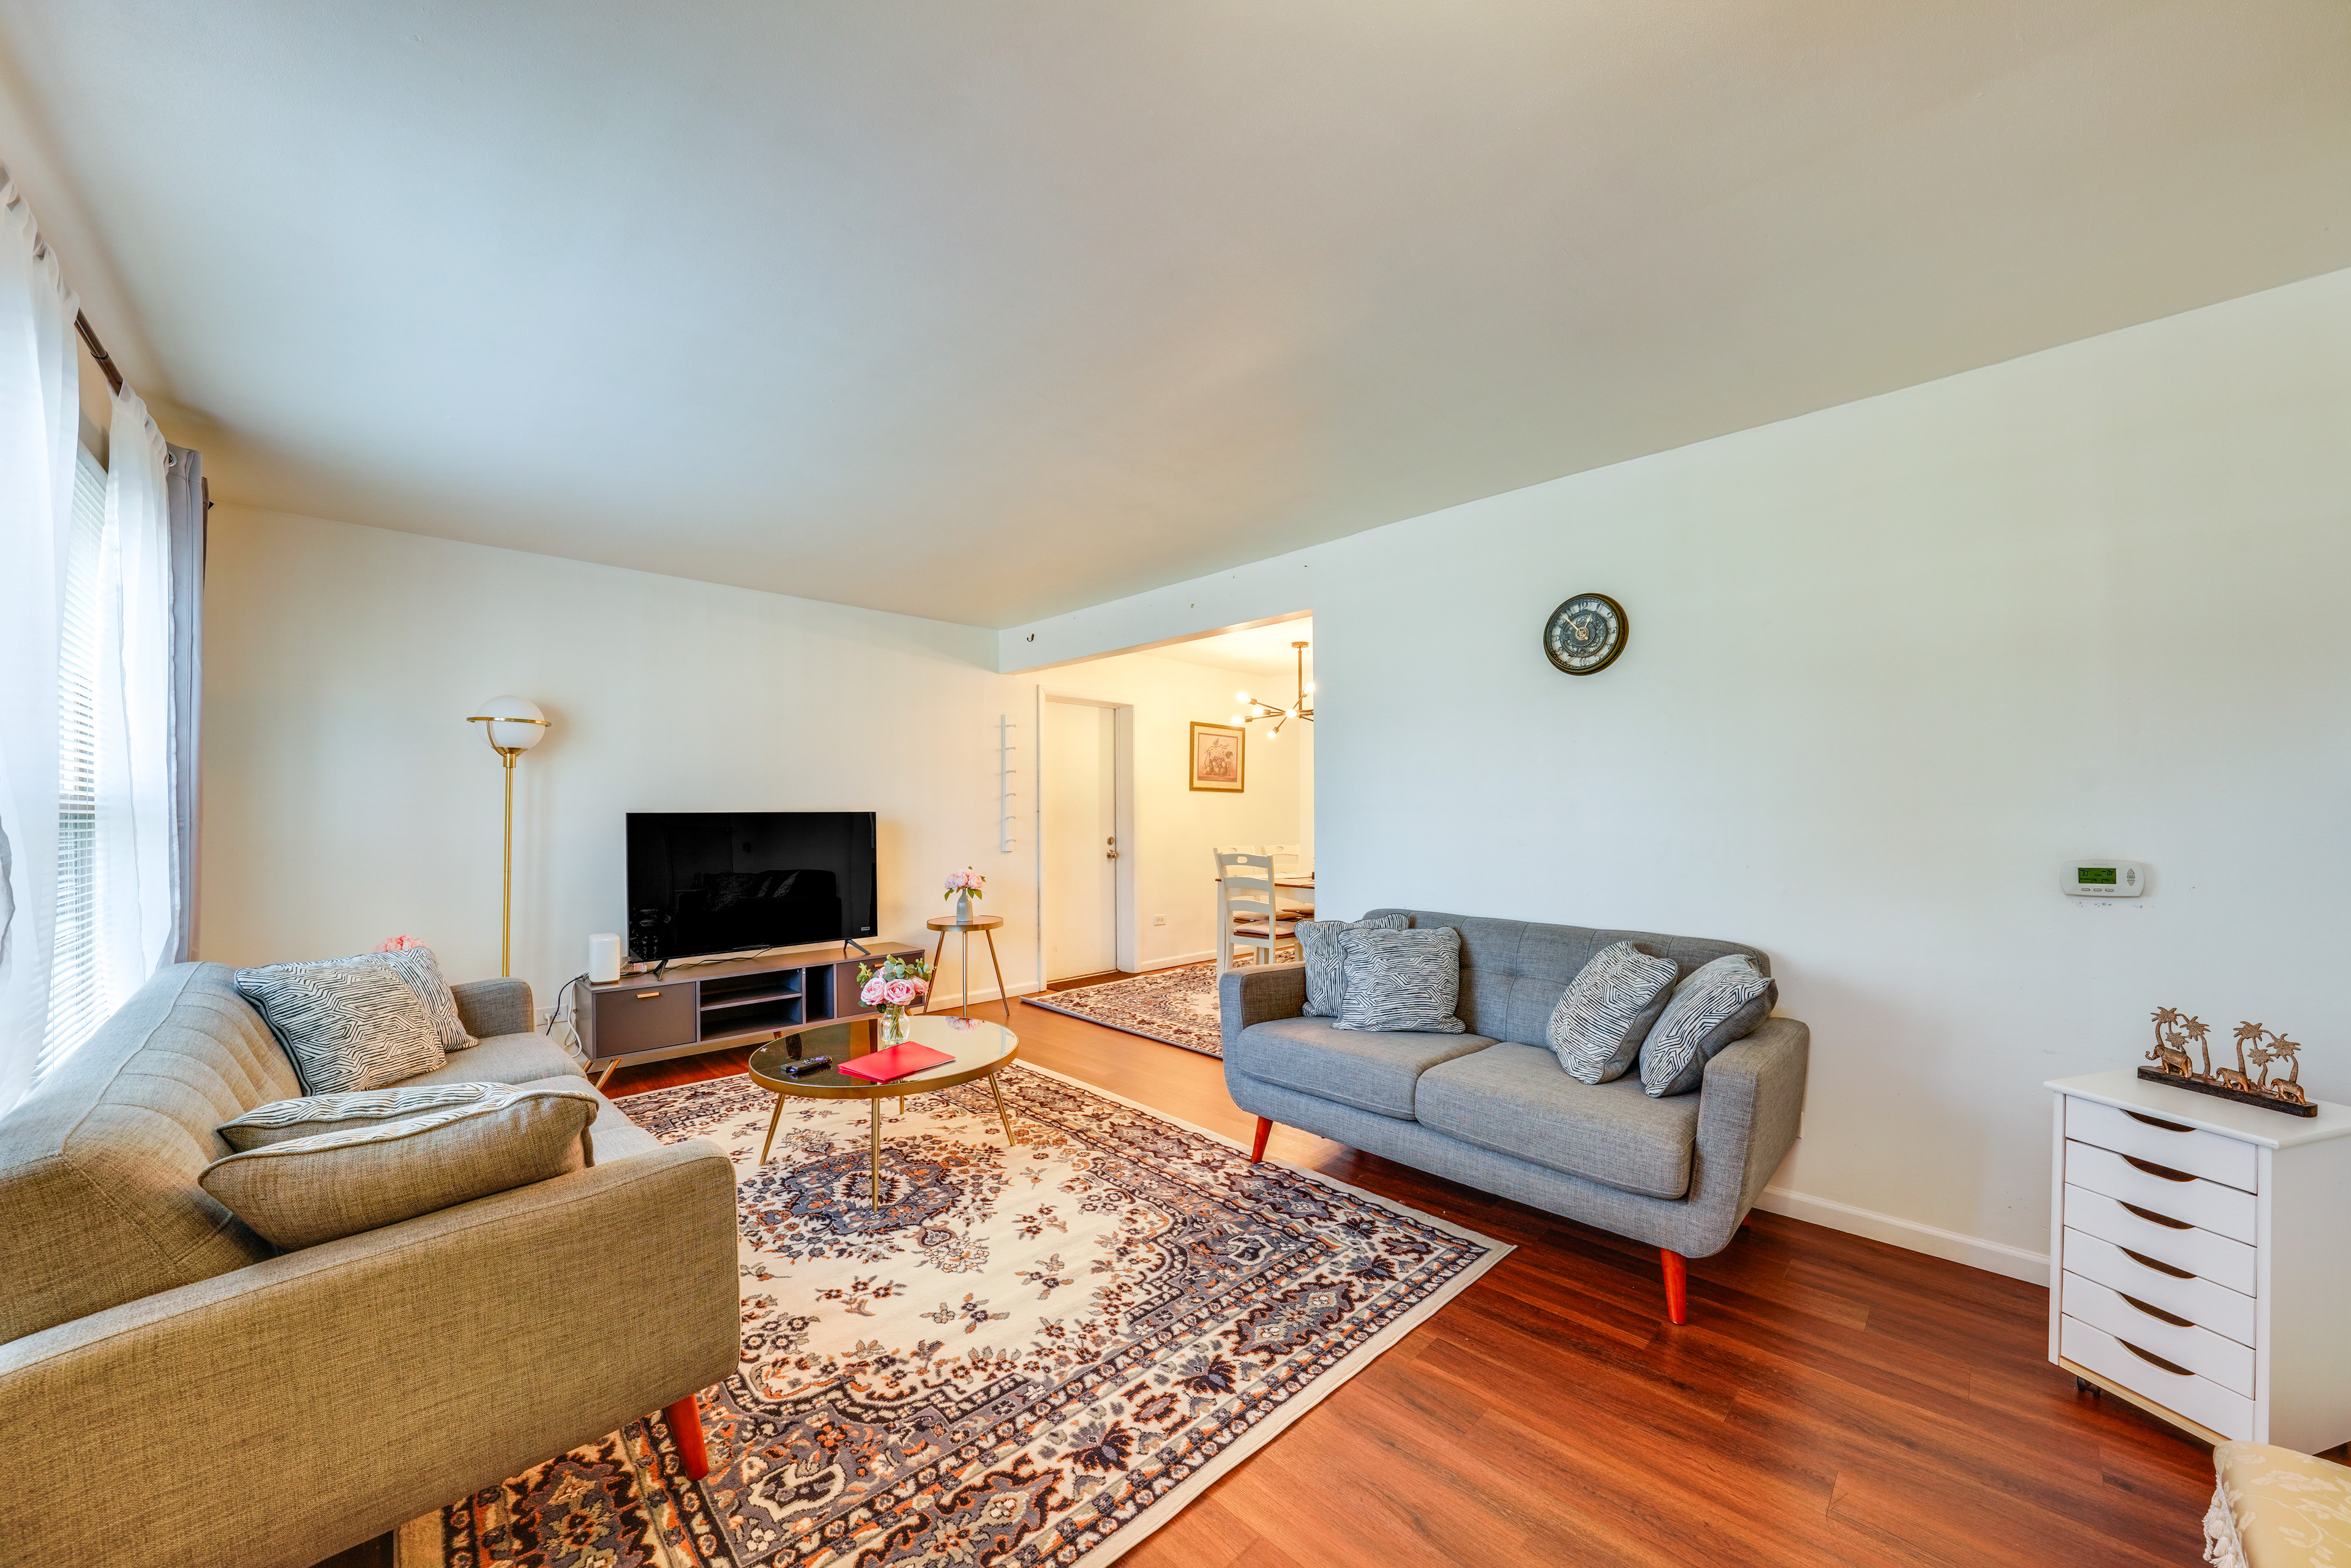 Property Image 1 - Cozy & Quiet Hanover Park Townhome!